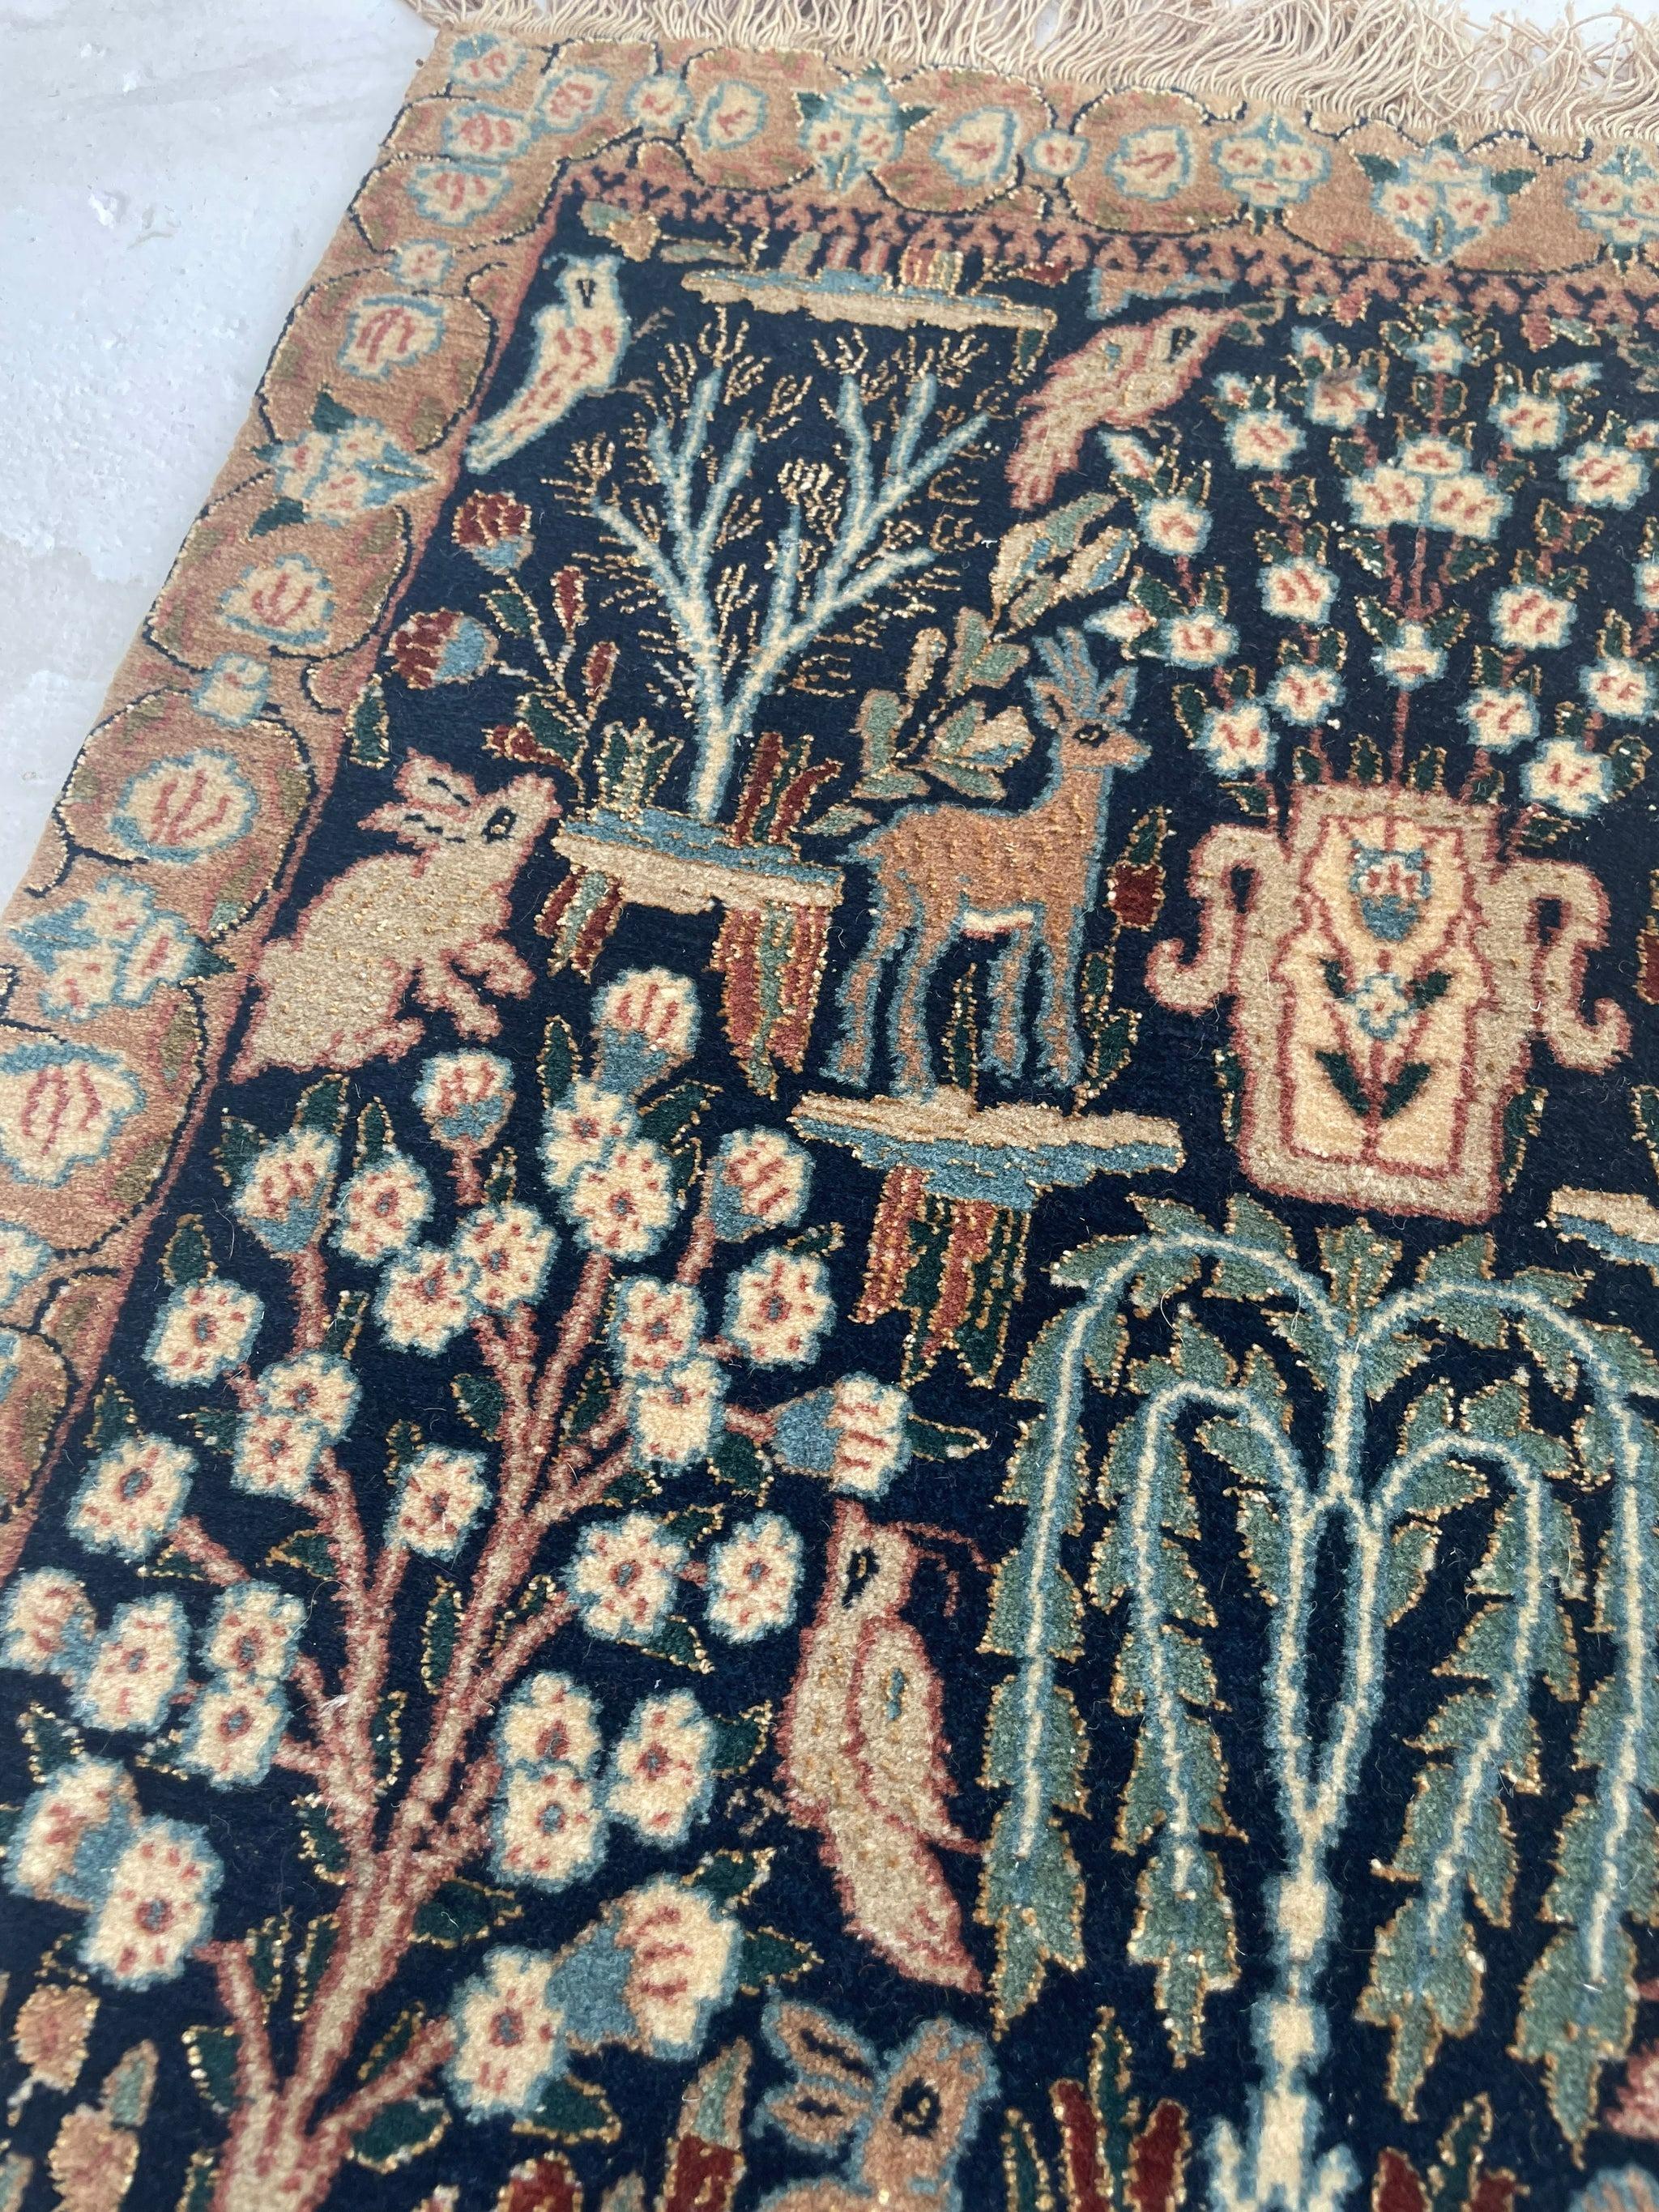 Incredible Vintage Paradise Tree of Life Scene  Collector's Piece 

About: Incredible classical piece

Size: 1.9 x 2.8
Age: Vintage
Pile: Superfine hand-spun lamb wool with silk highlights 

This rug is one-of-a-kind, only one in the world, no